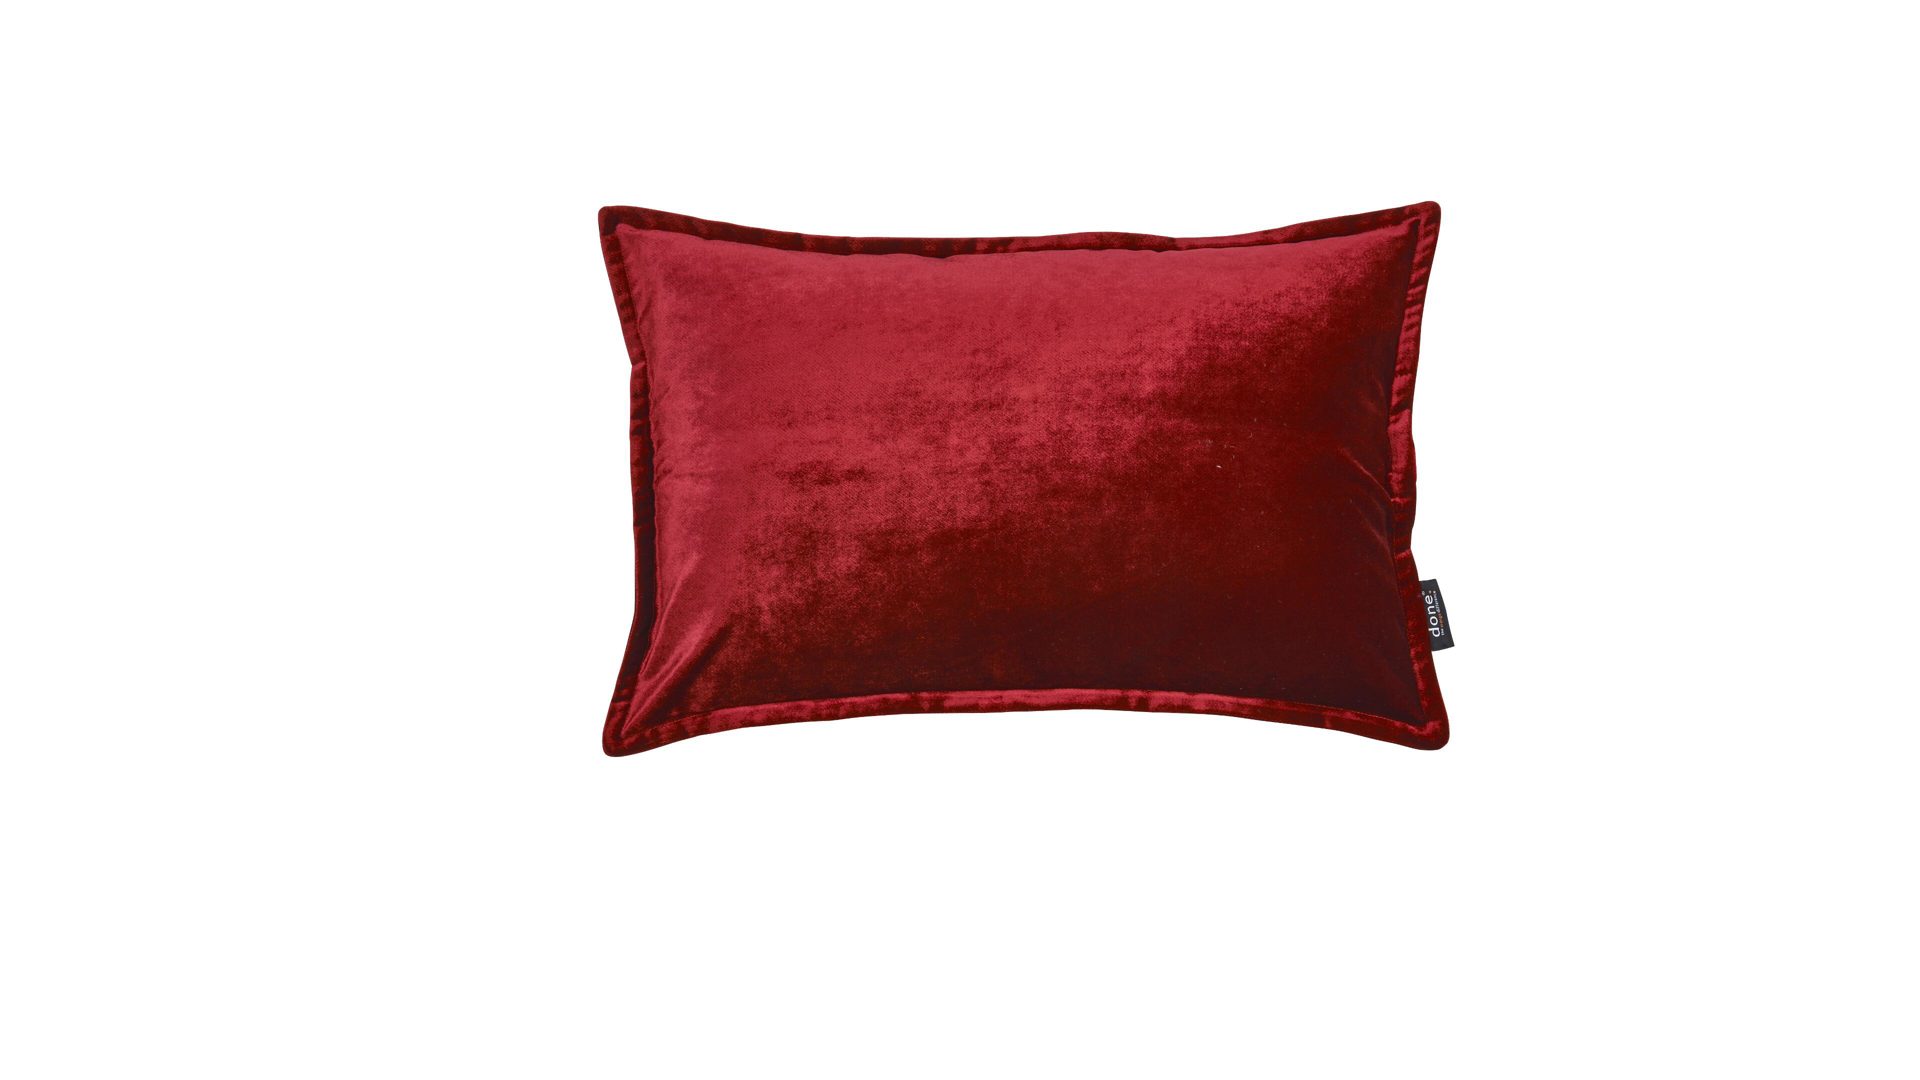 Kissenbezug /-hülle Done® be different aus Stoff in Dunkelrot DONE® Kissenhülle Cushion Glam roter Samt – ca. 40 x 60 cm